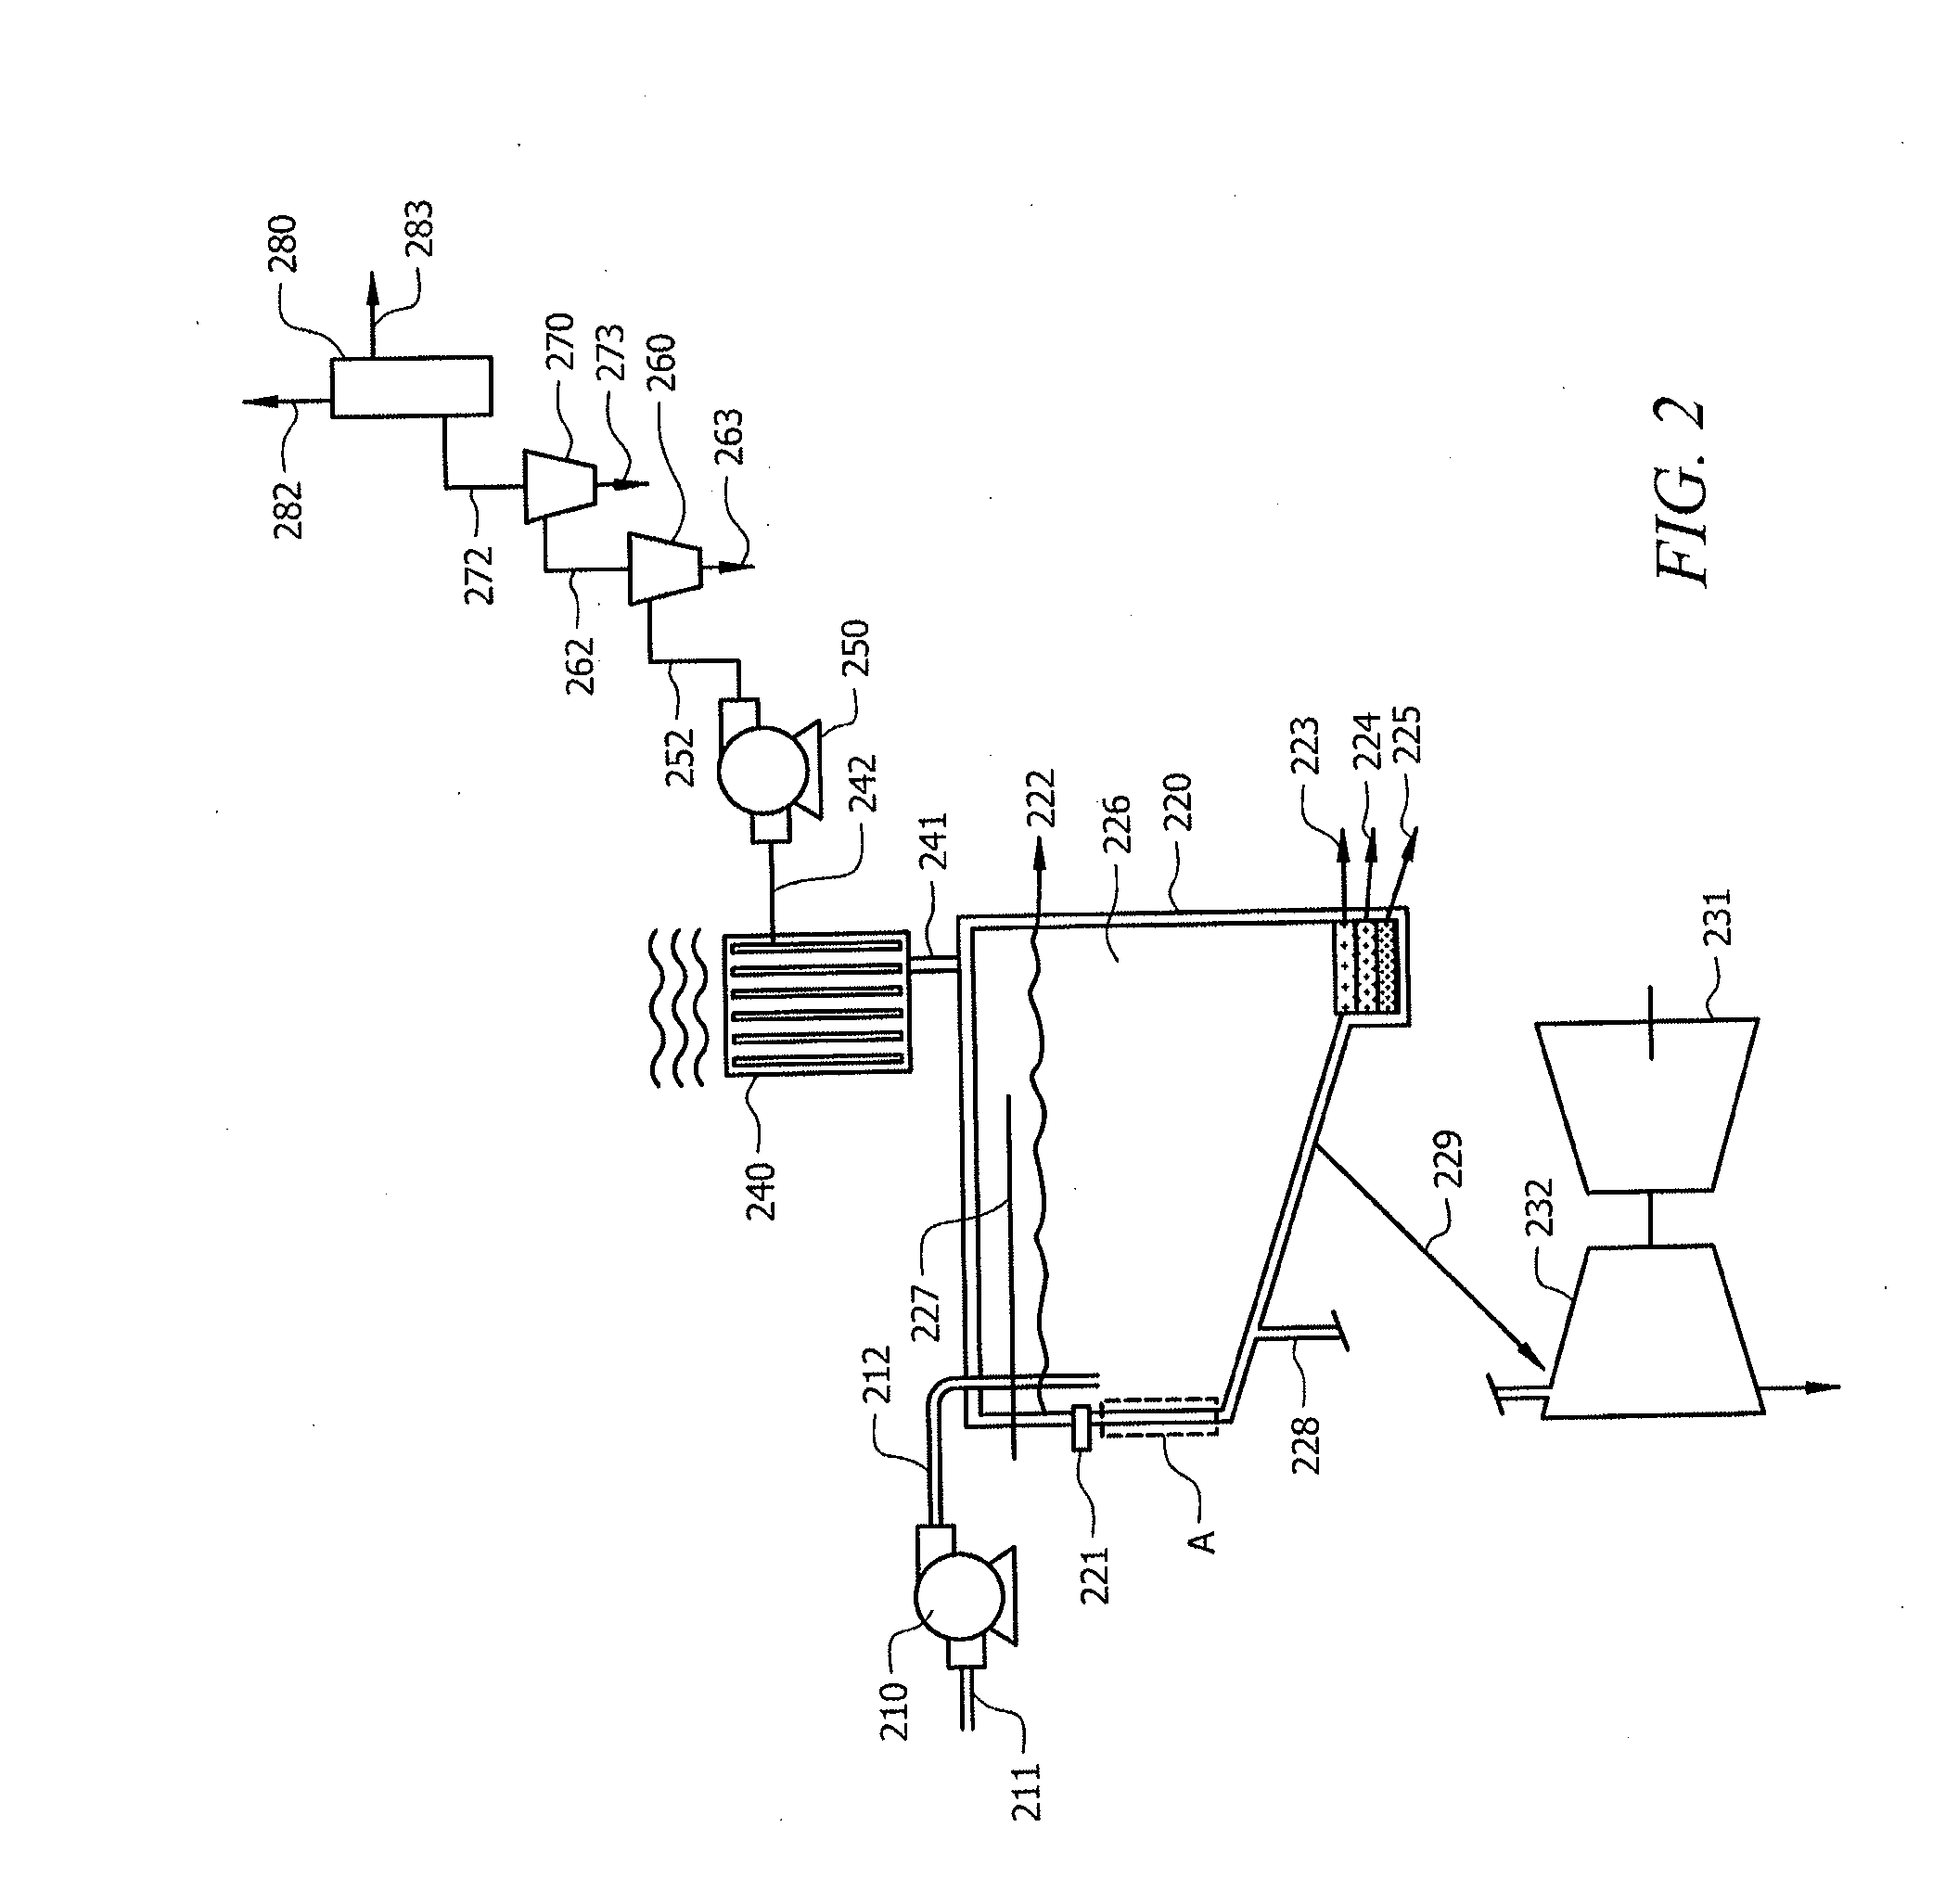 Gasification or Liquefaction of Coal Using a Metal Reactant Alloy Composition